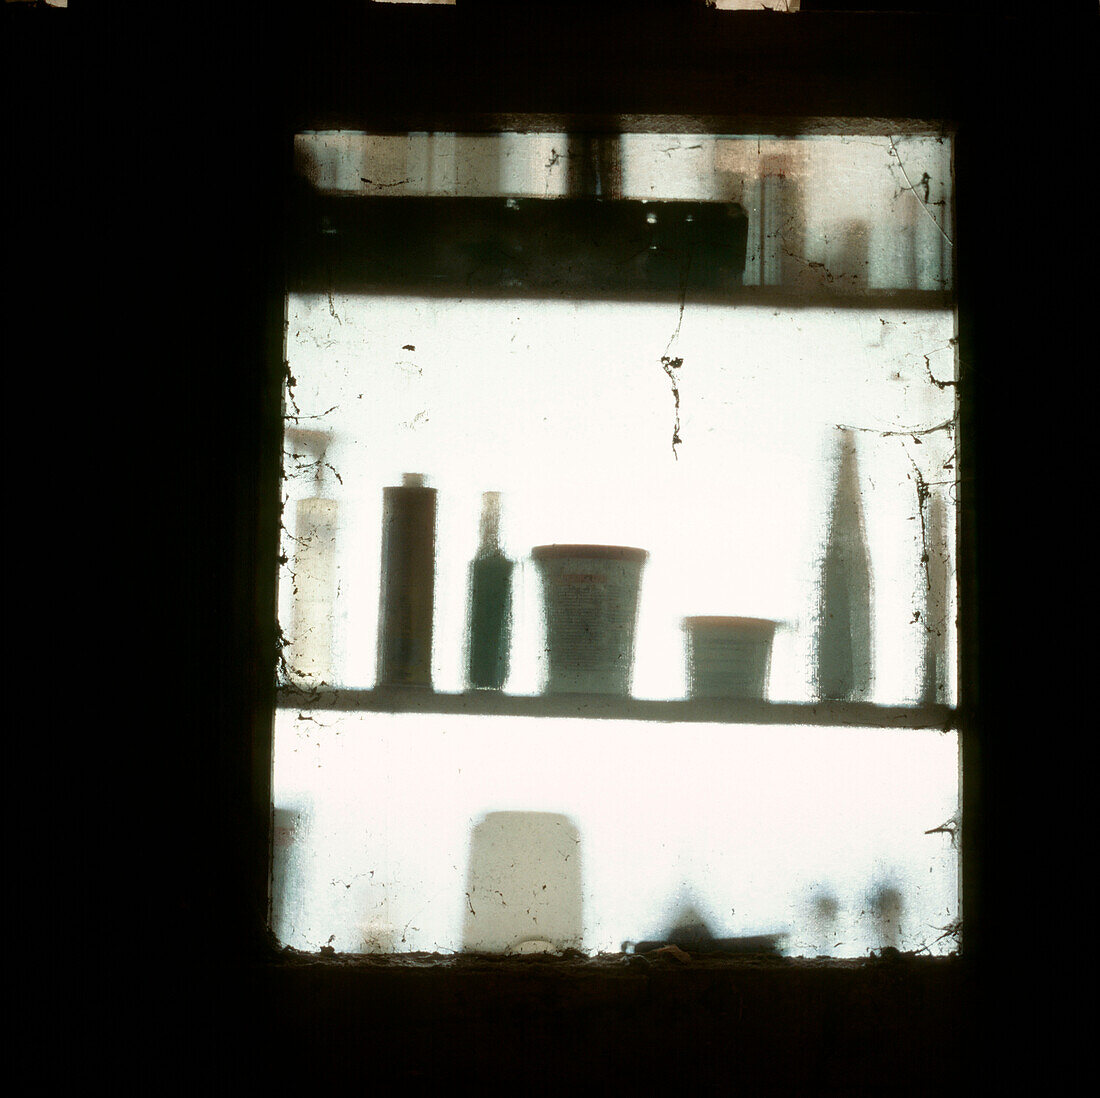 View of shed window with shadows of paint pots and DIY products on shelves